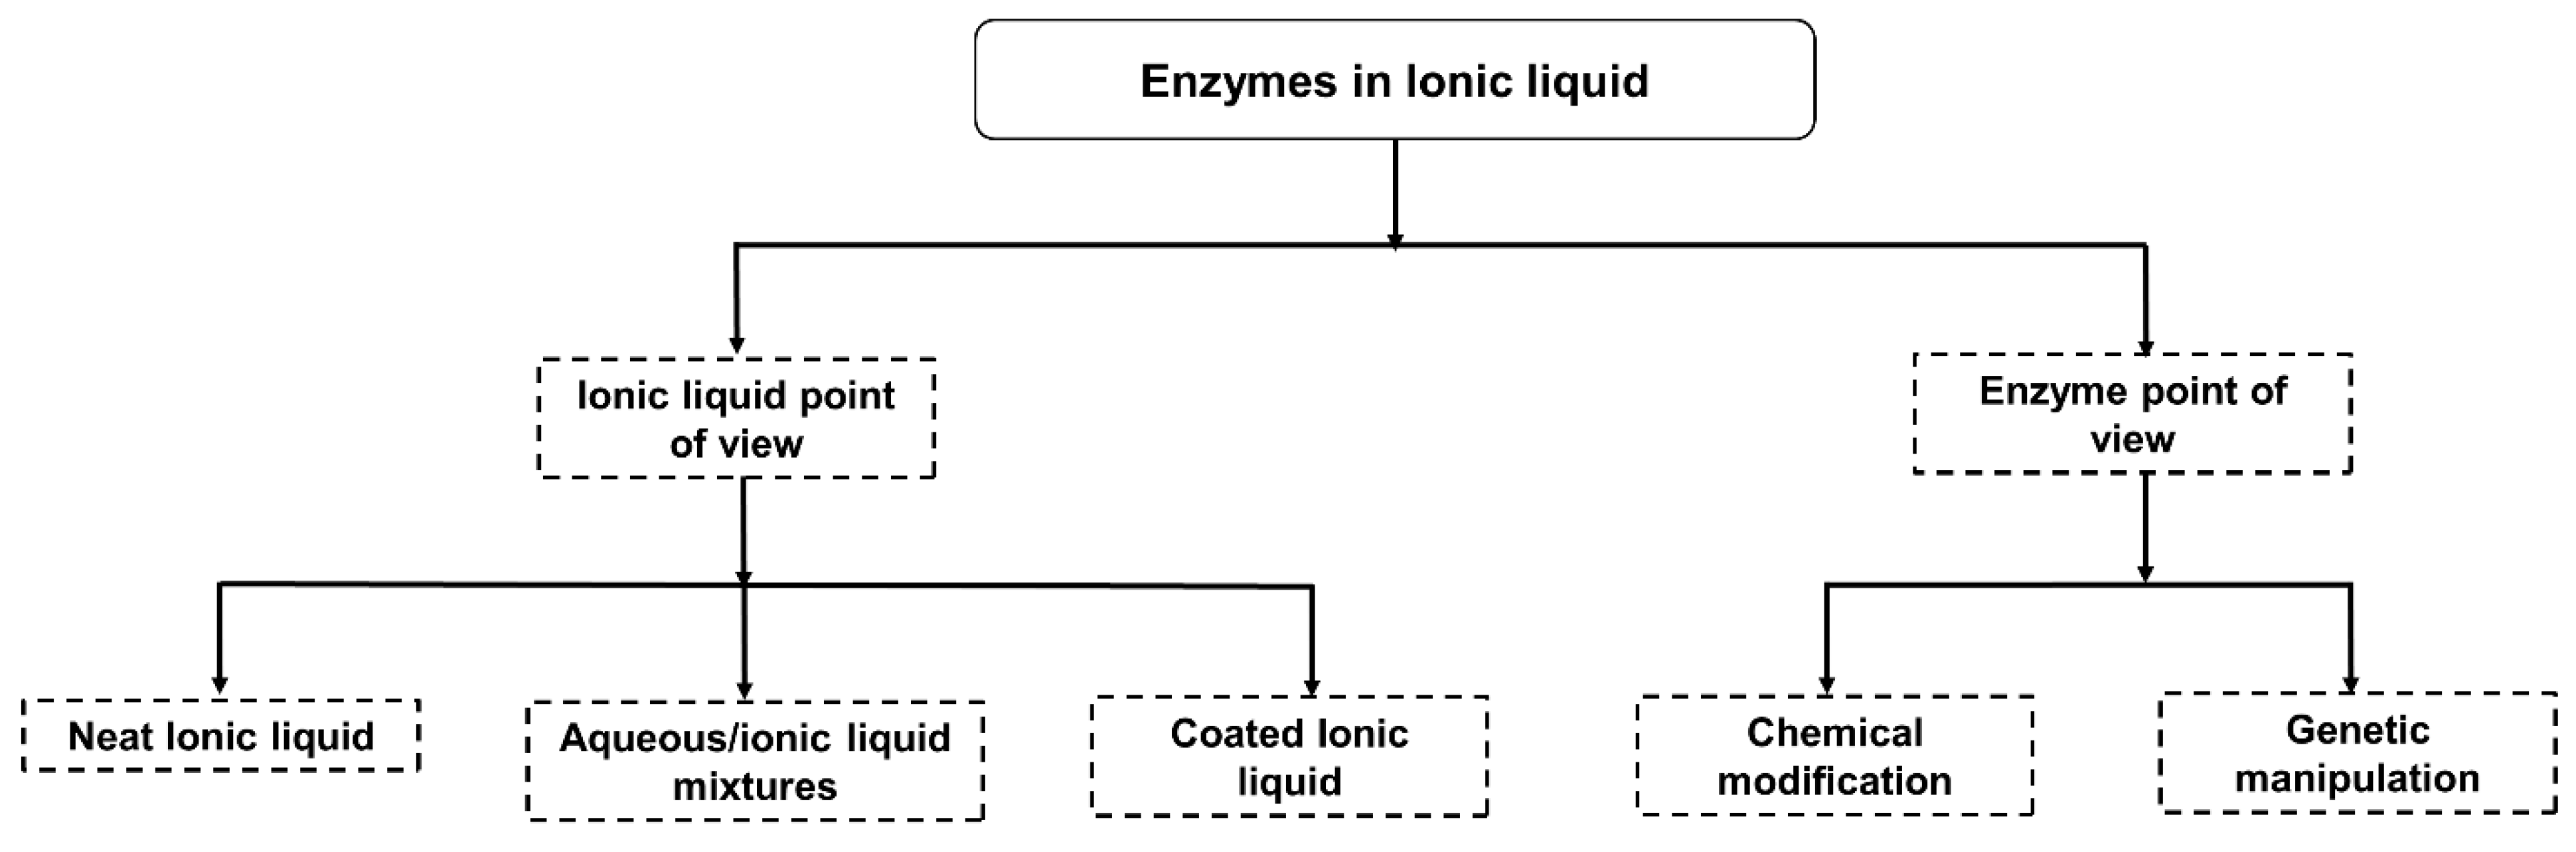 Molecules | Free Full-Text | Applications of Ionic Liquids in Whole ...